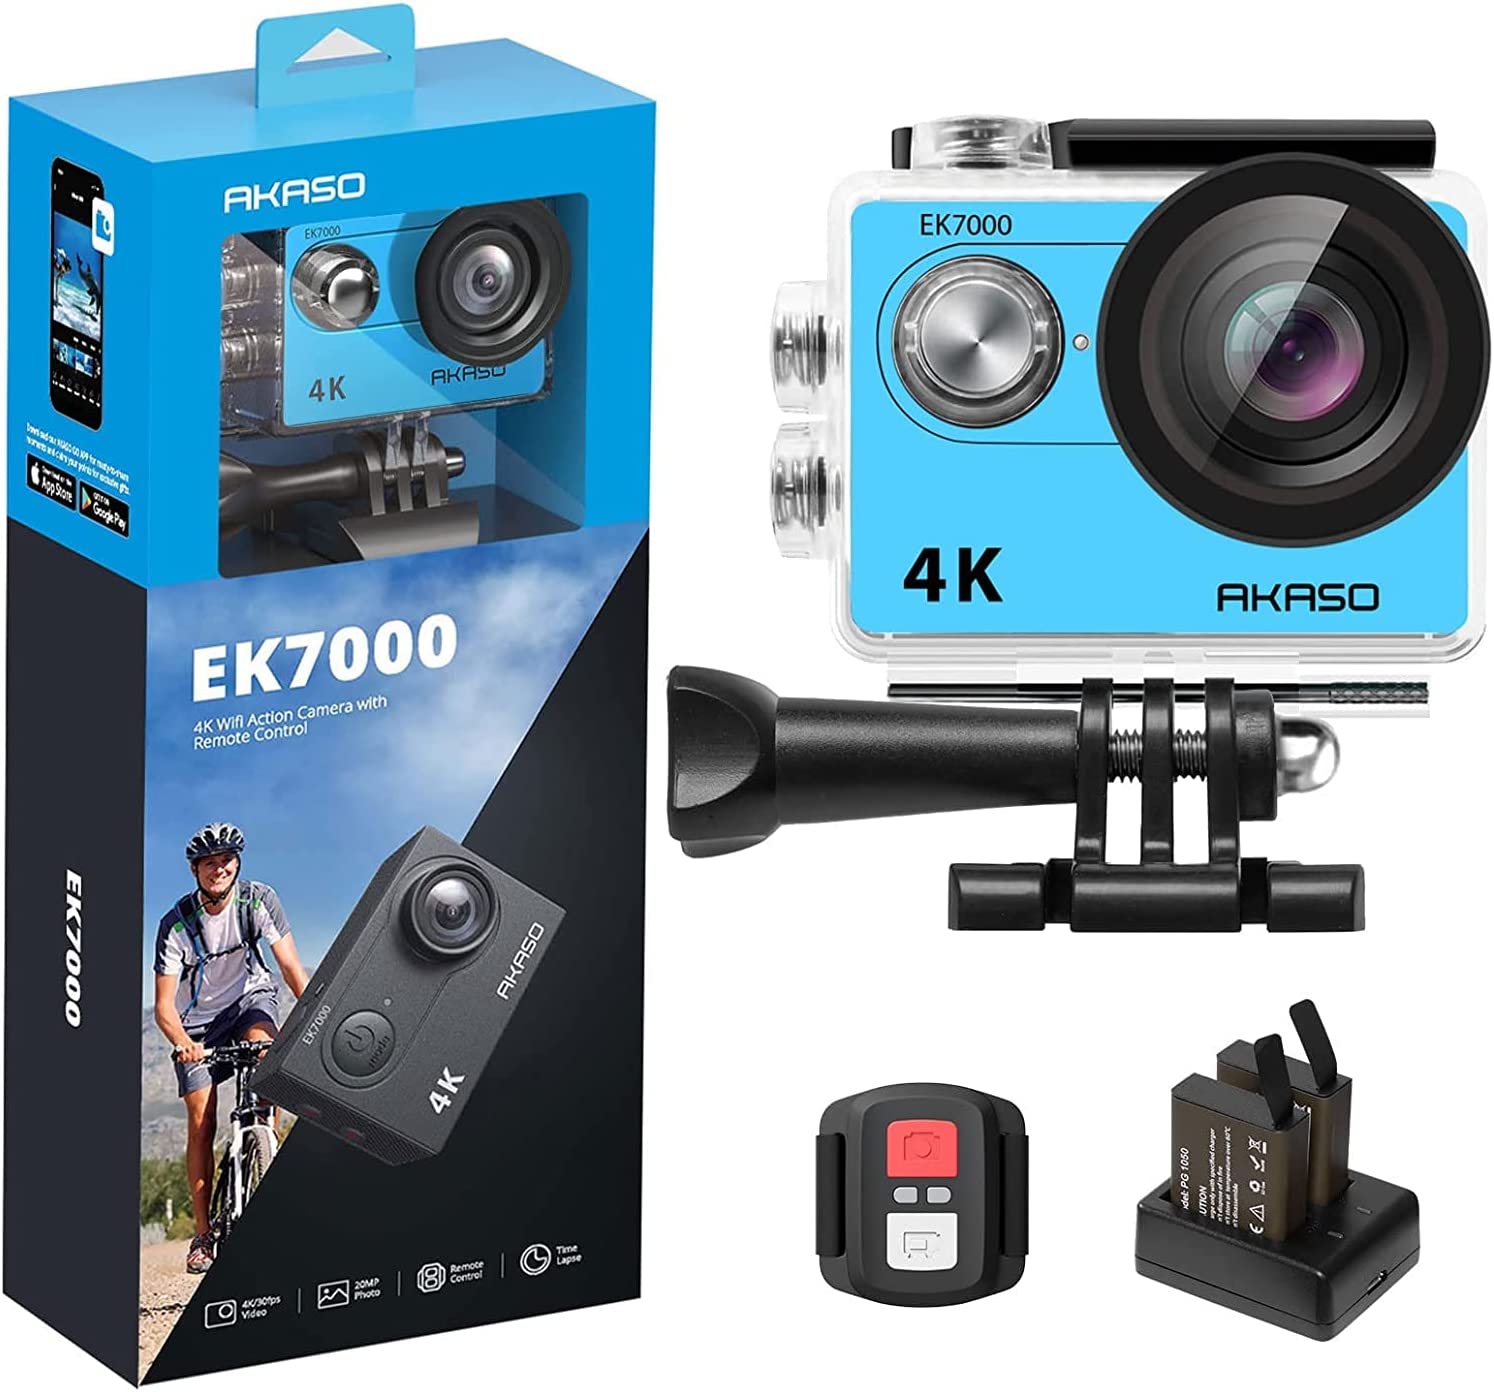 Akaso V50 Pro Action Camera Ultra Hd Native 4k Edition ( New /Only  Accessories )